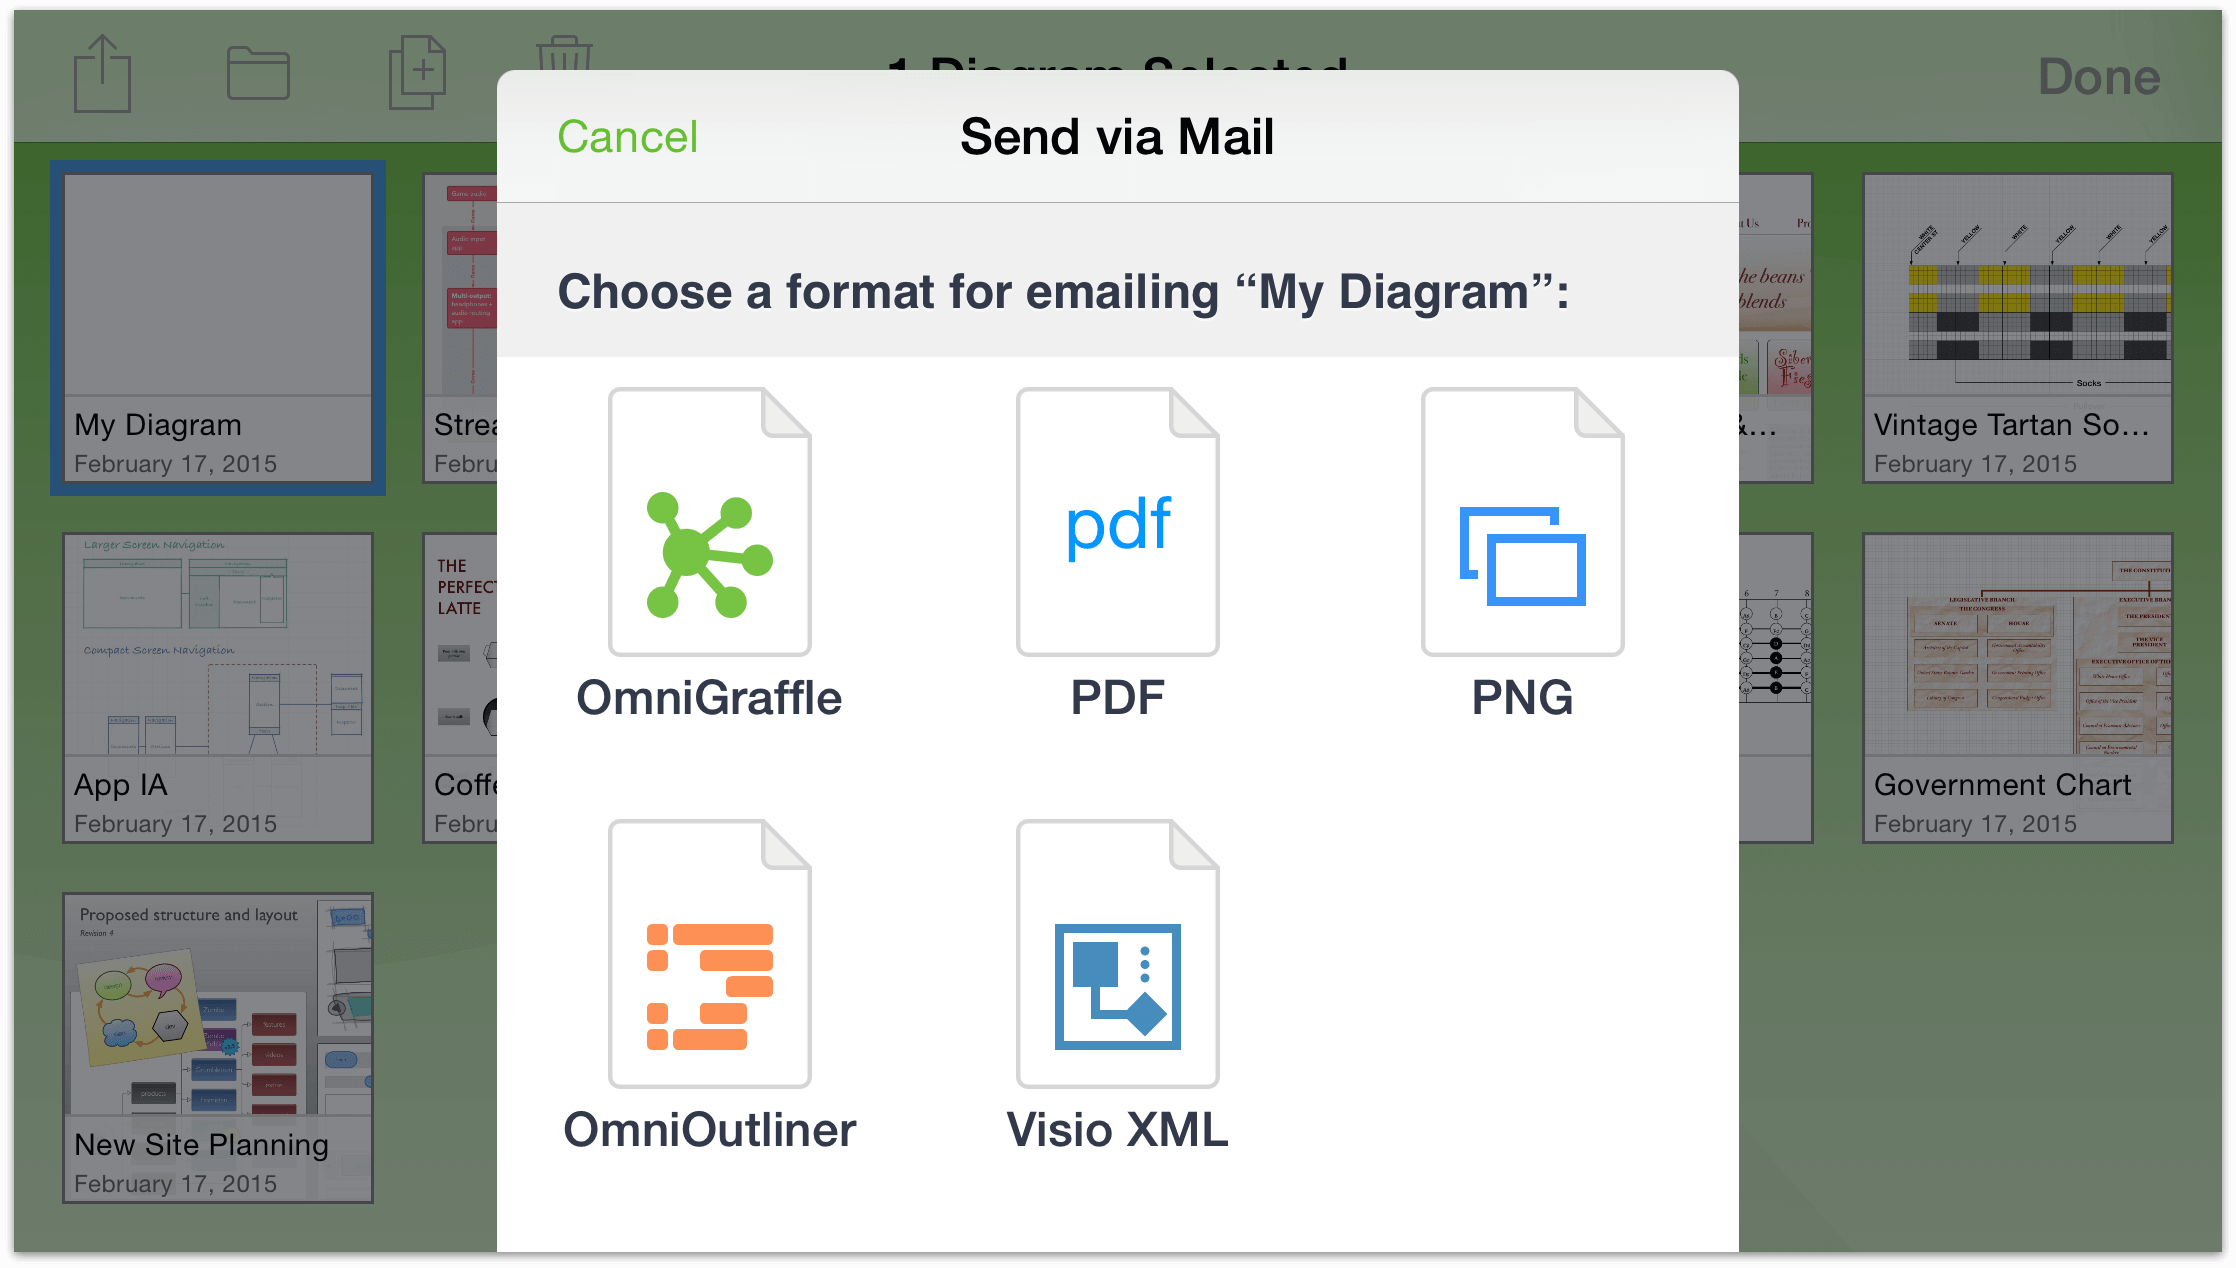 Choose the document format you would like to send as an email attachment.